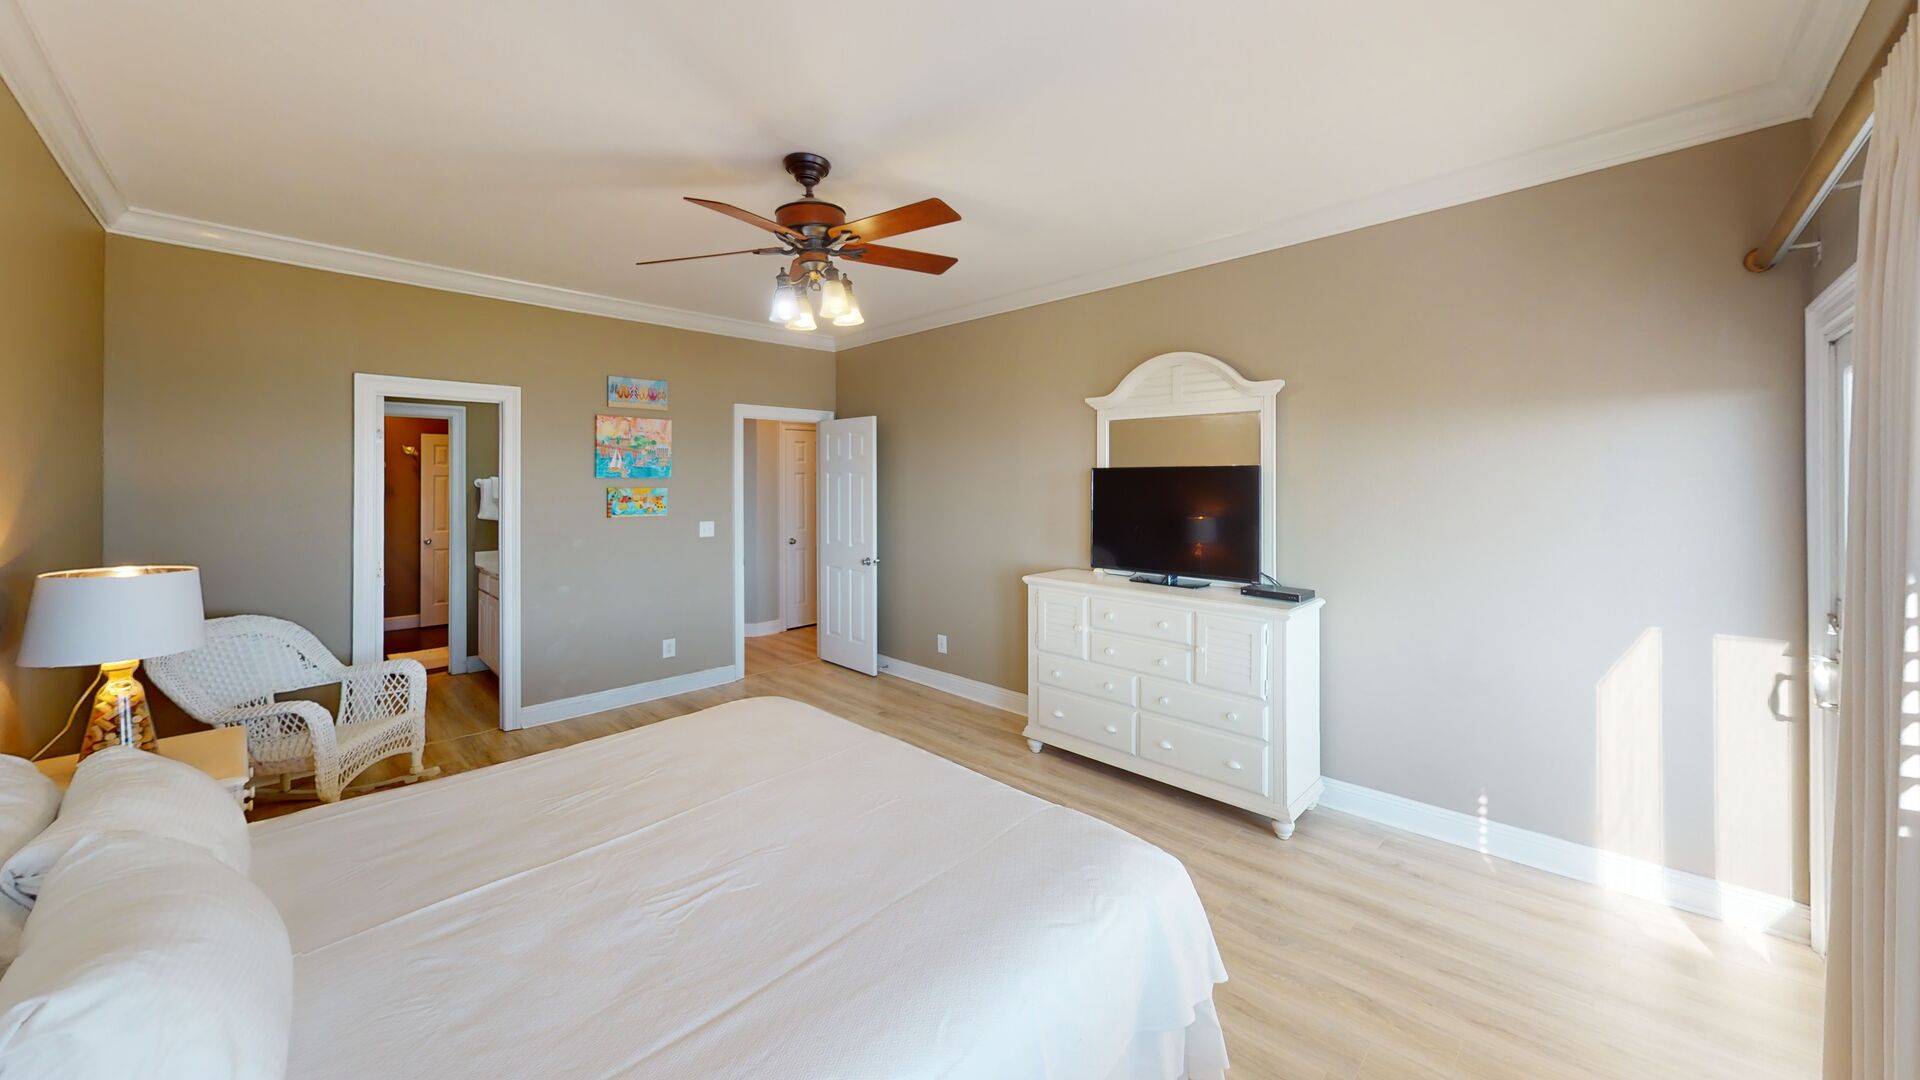 Bedroom 5 has a TV, Gulf views, balcony access and an attached bath with a hall entrance